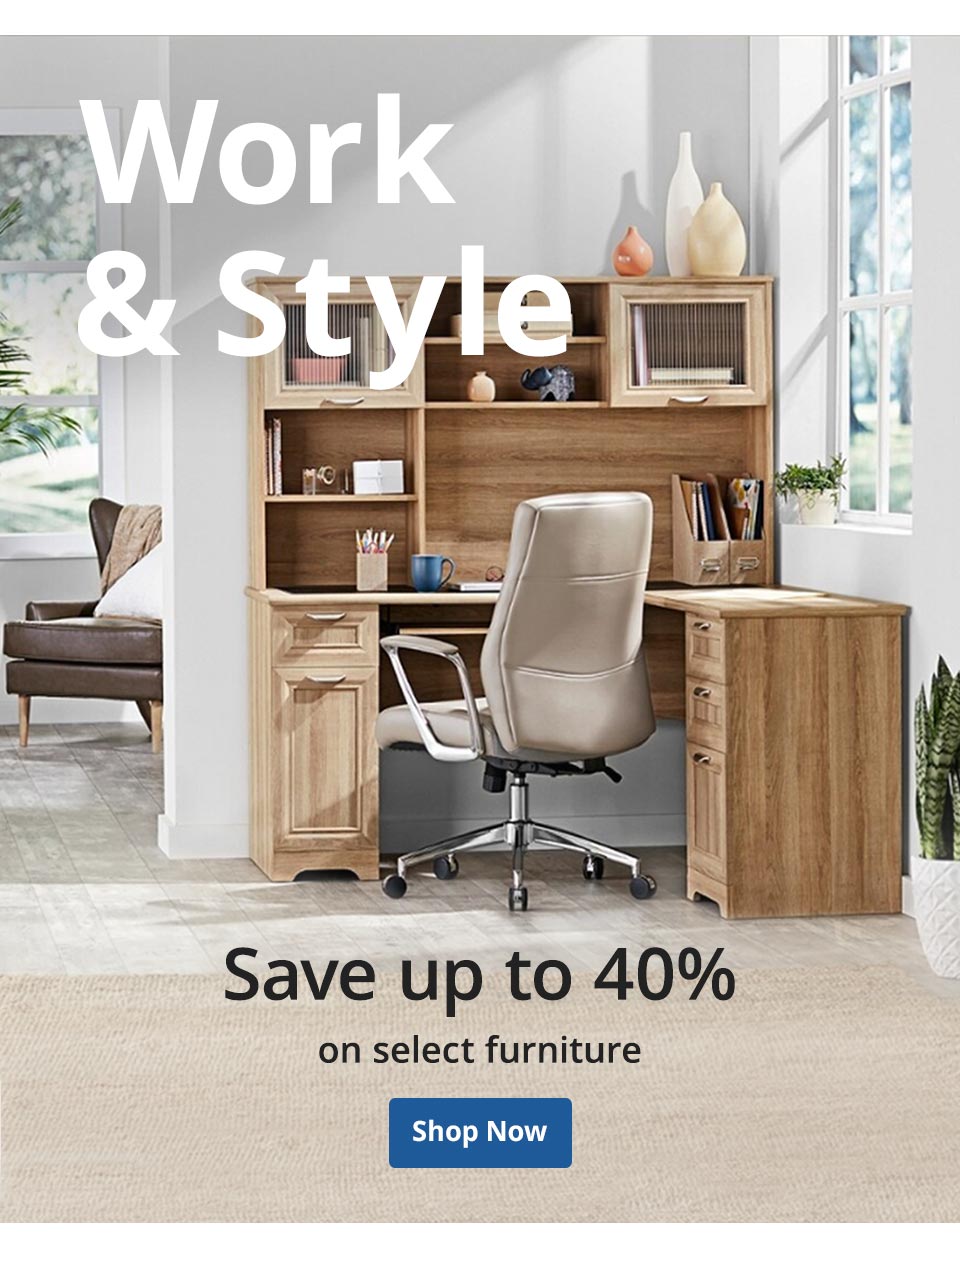 Update Your Style Furniture Sale Is Happening Office Depot